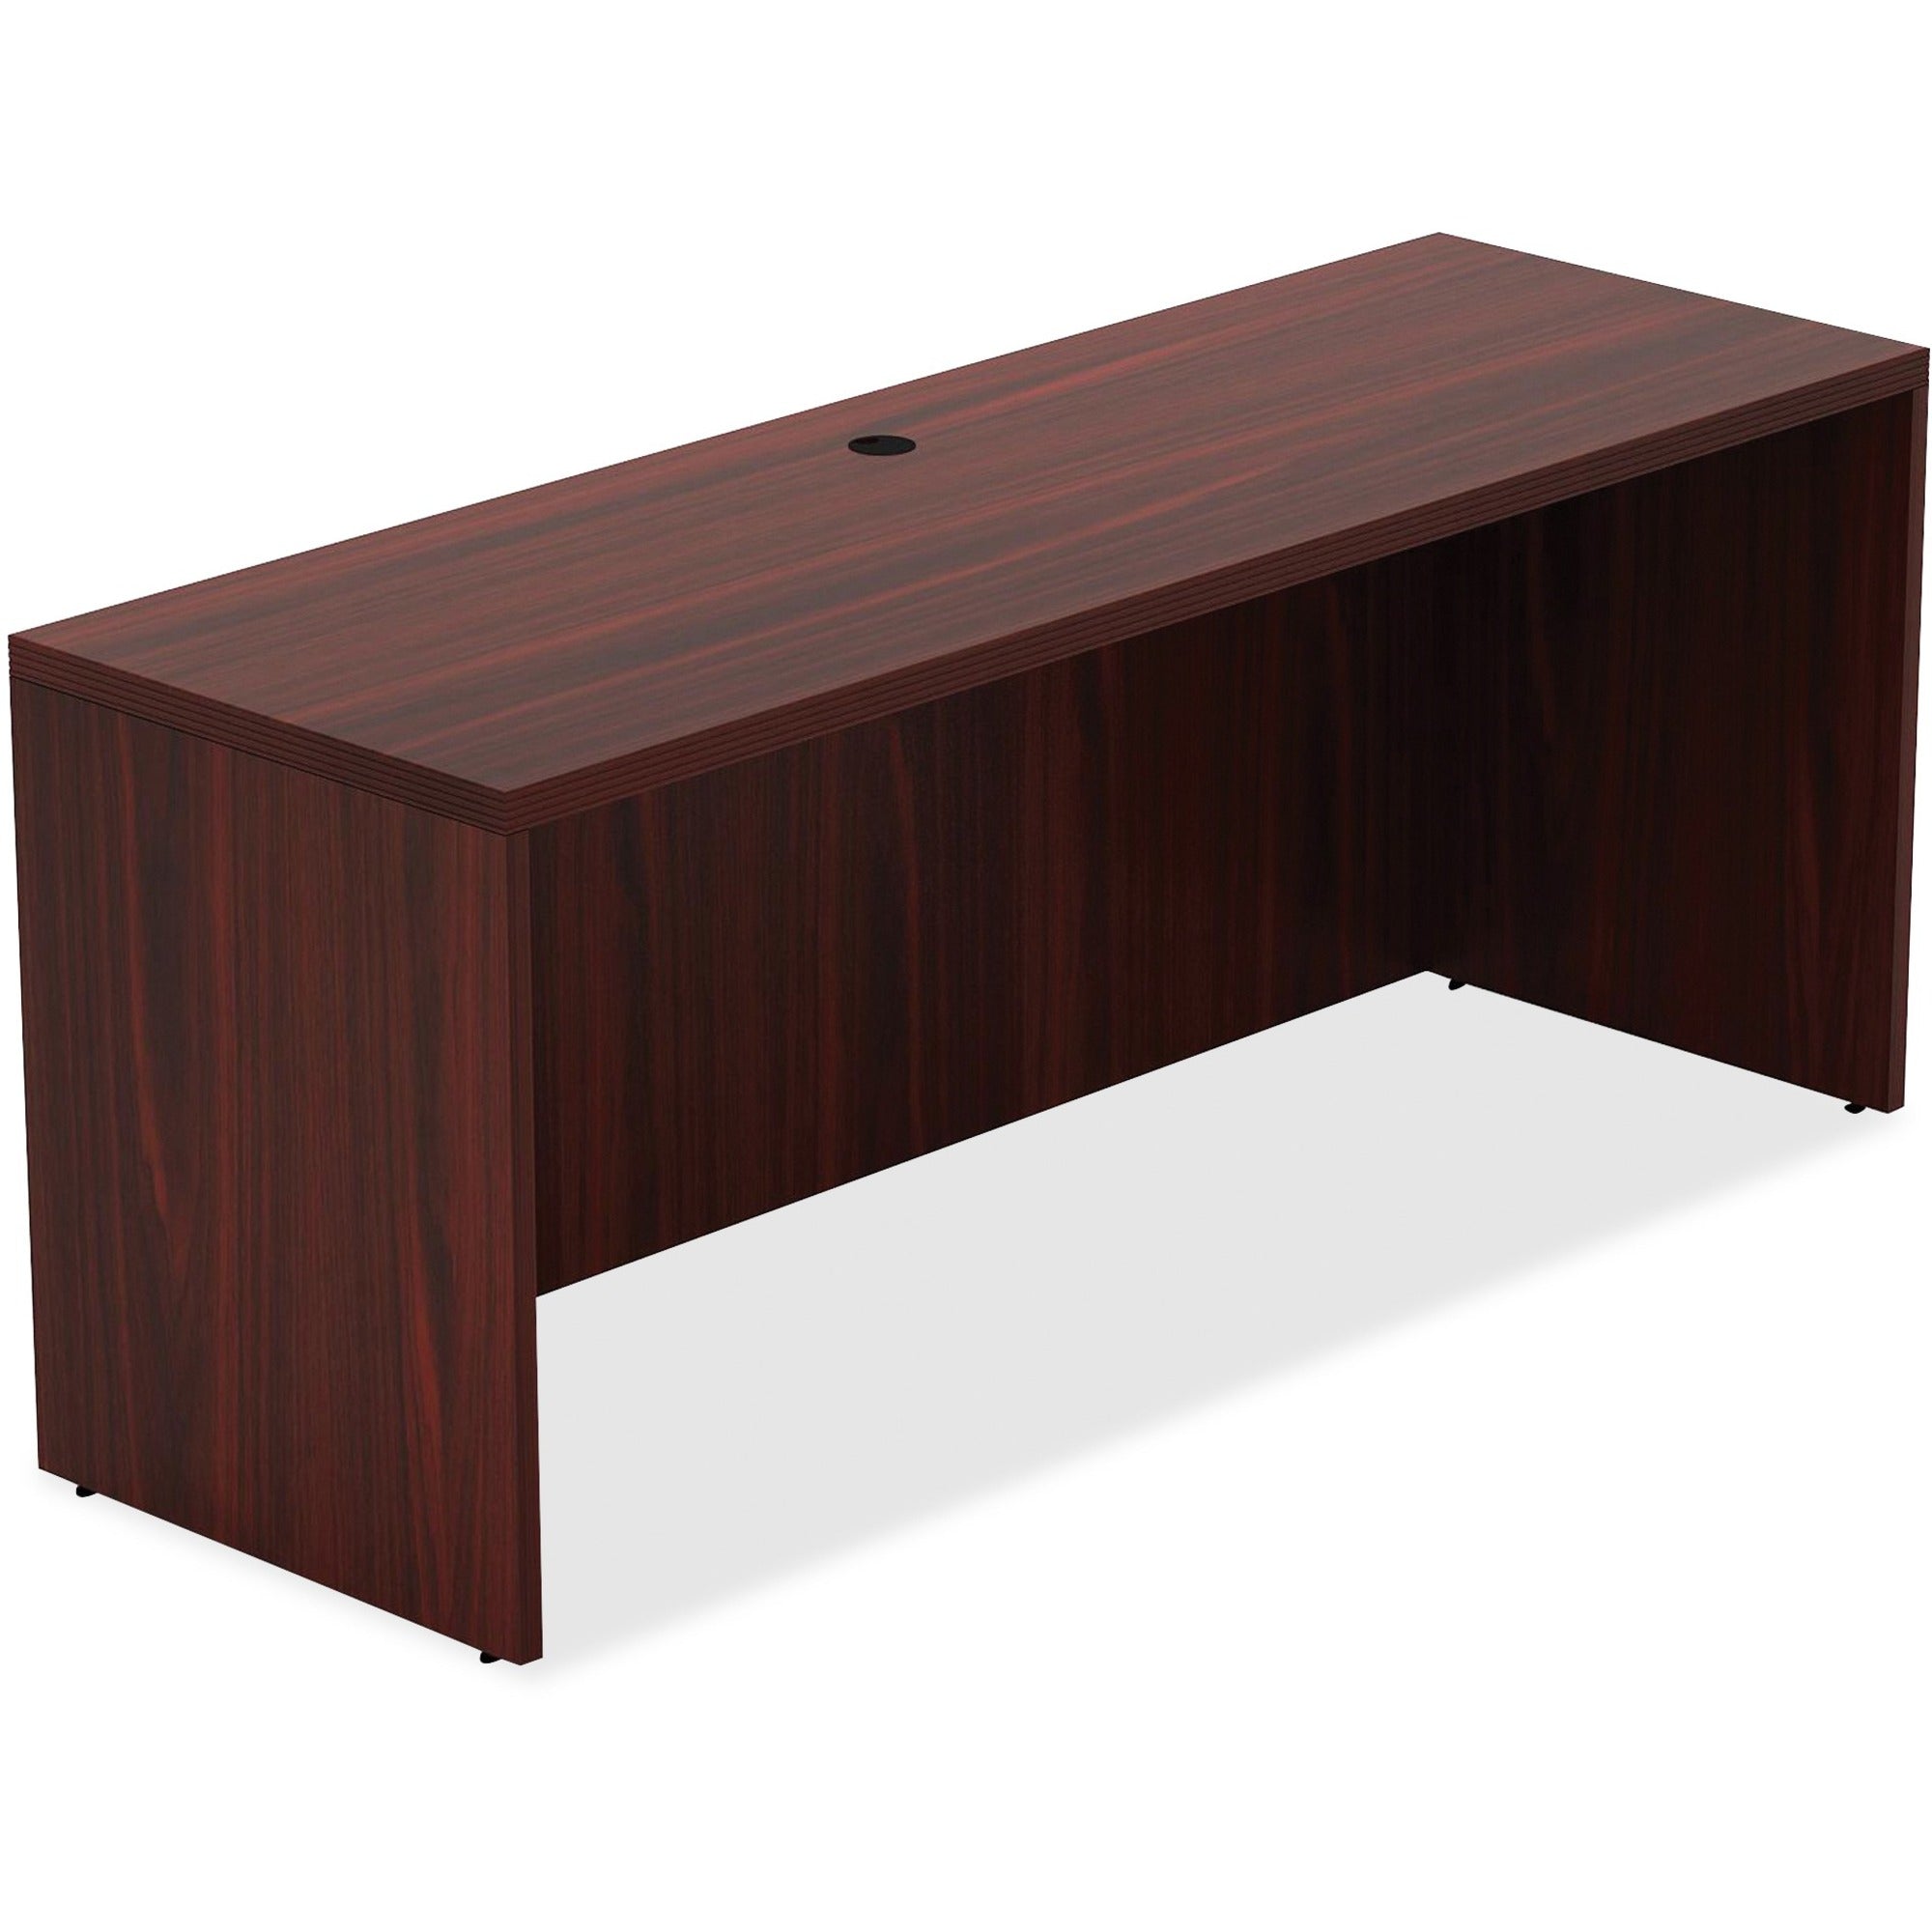 Lorell Chateau Series Credenza - 66.1" x 23.6"30" Credenza, 1.5" Top - Reeded Edge - Material: P2 Particleboard - Finish: Mahogany, Laminate - Durable, Grommet, Cord Management, Modesty Panel - For Office - 